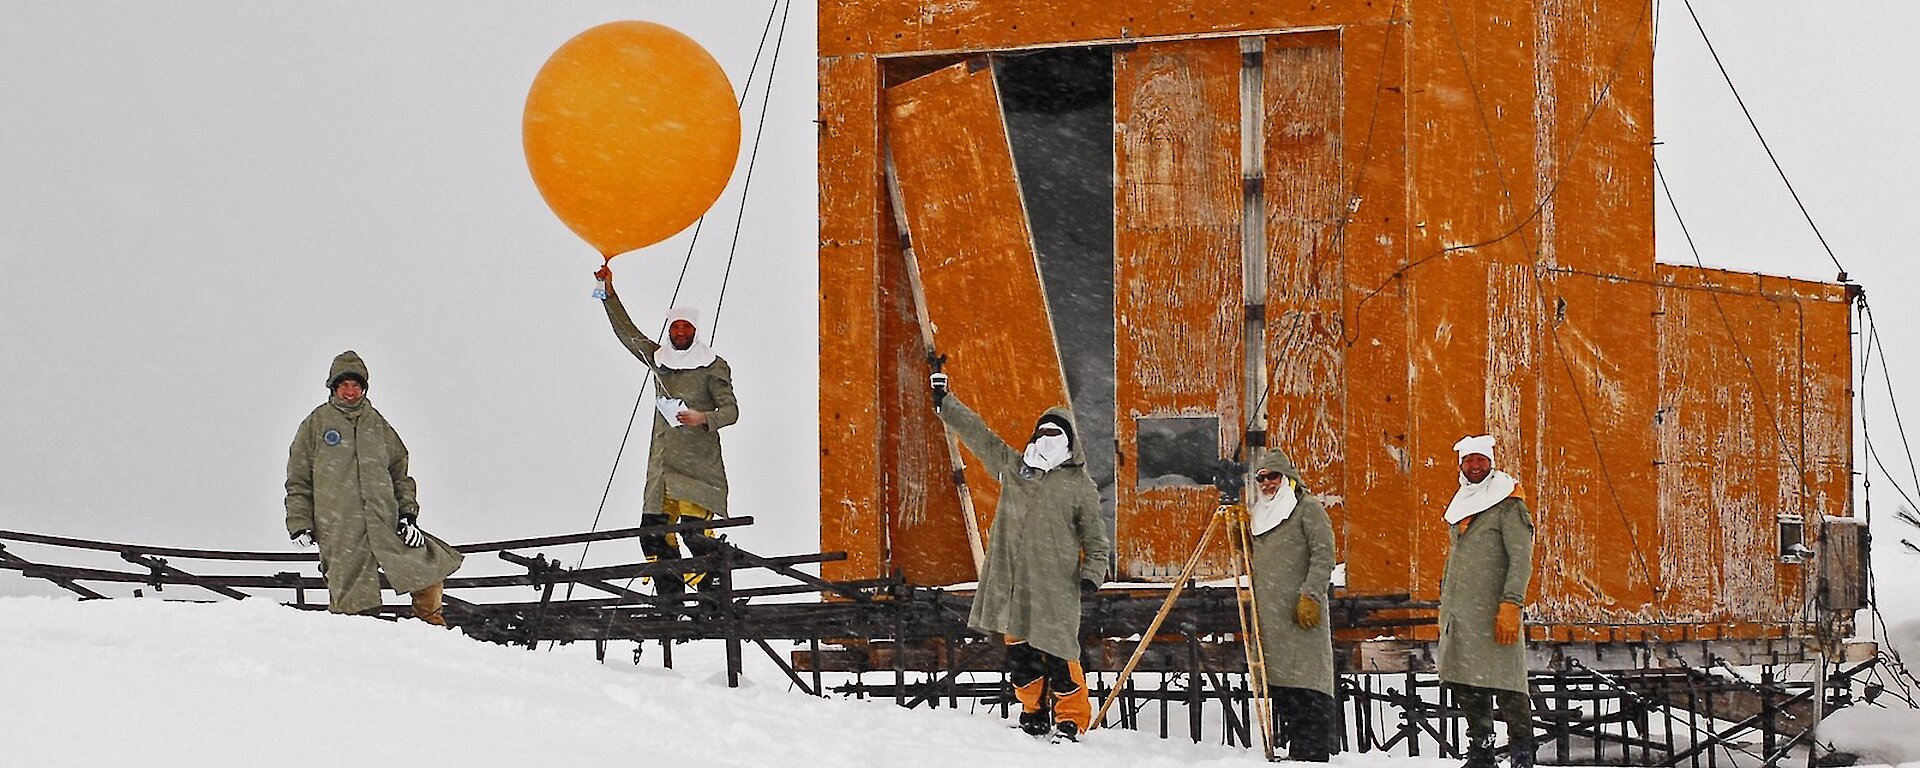 Expeditioners prepare to release a weather balloon in front of the old balloon shed at Wilkes.